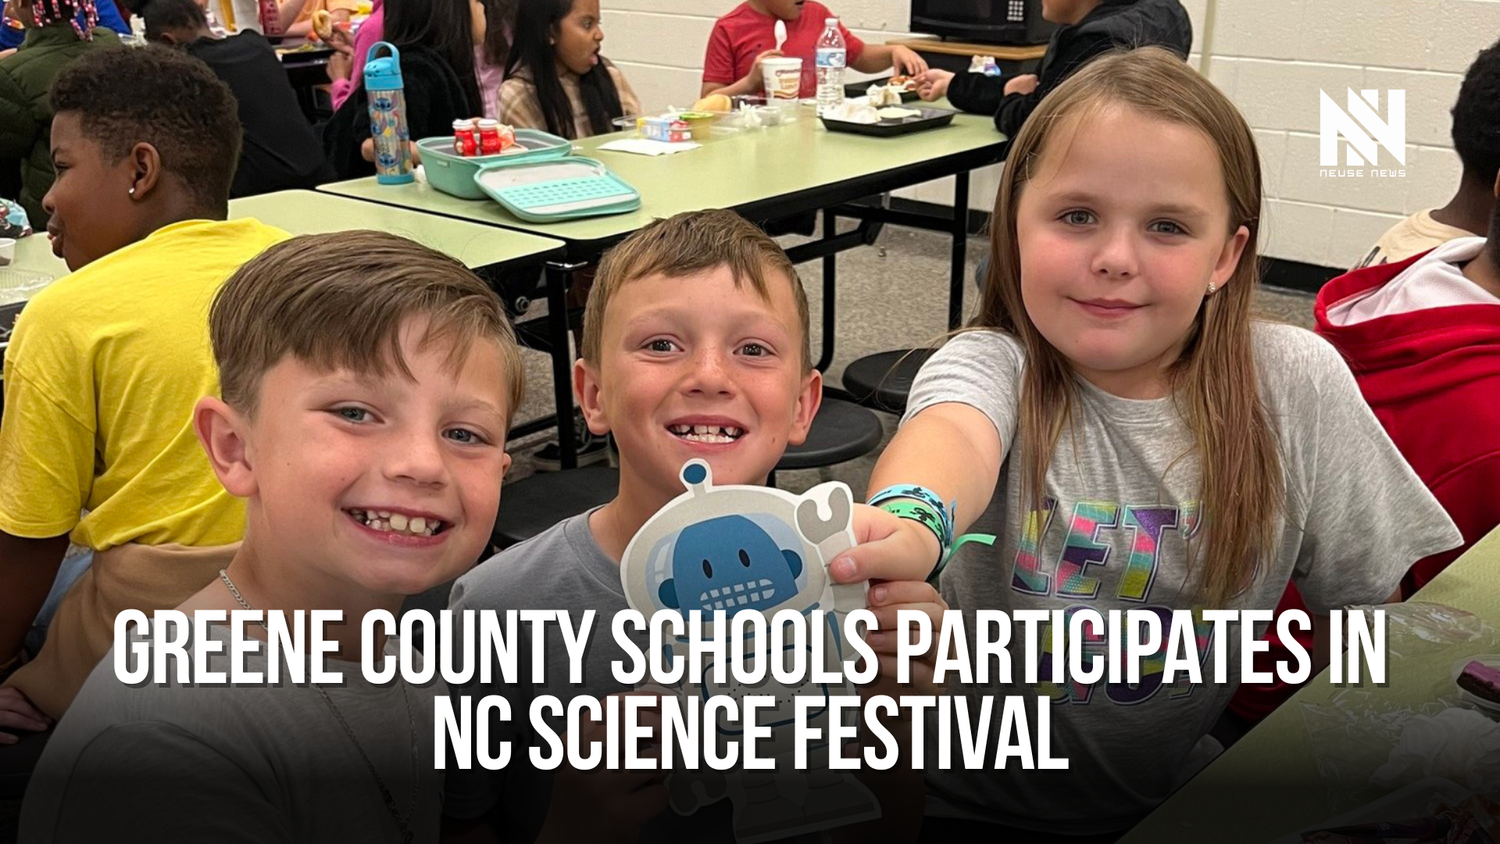 Science for Families: How Greene County Middle School Encourages Science Enthusiasm Through Fun-filled Events